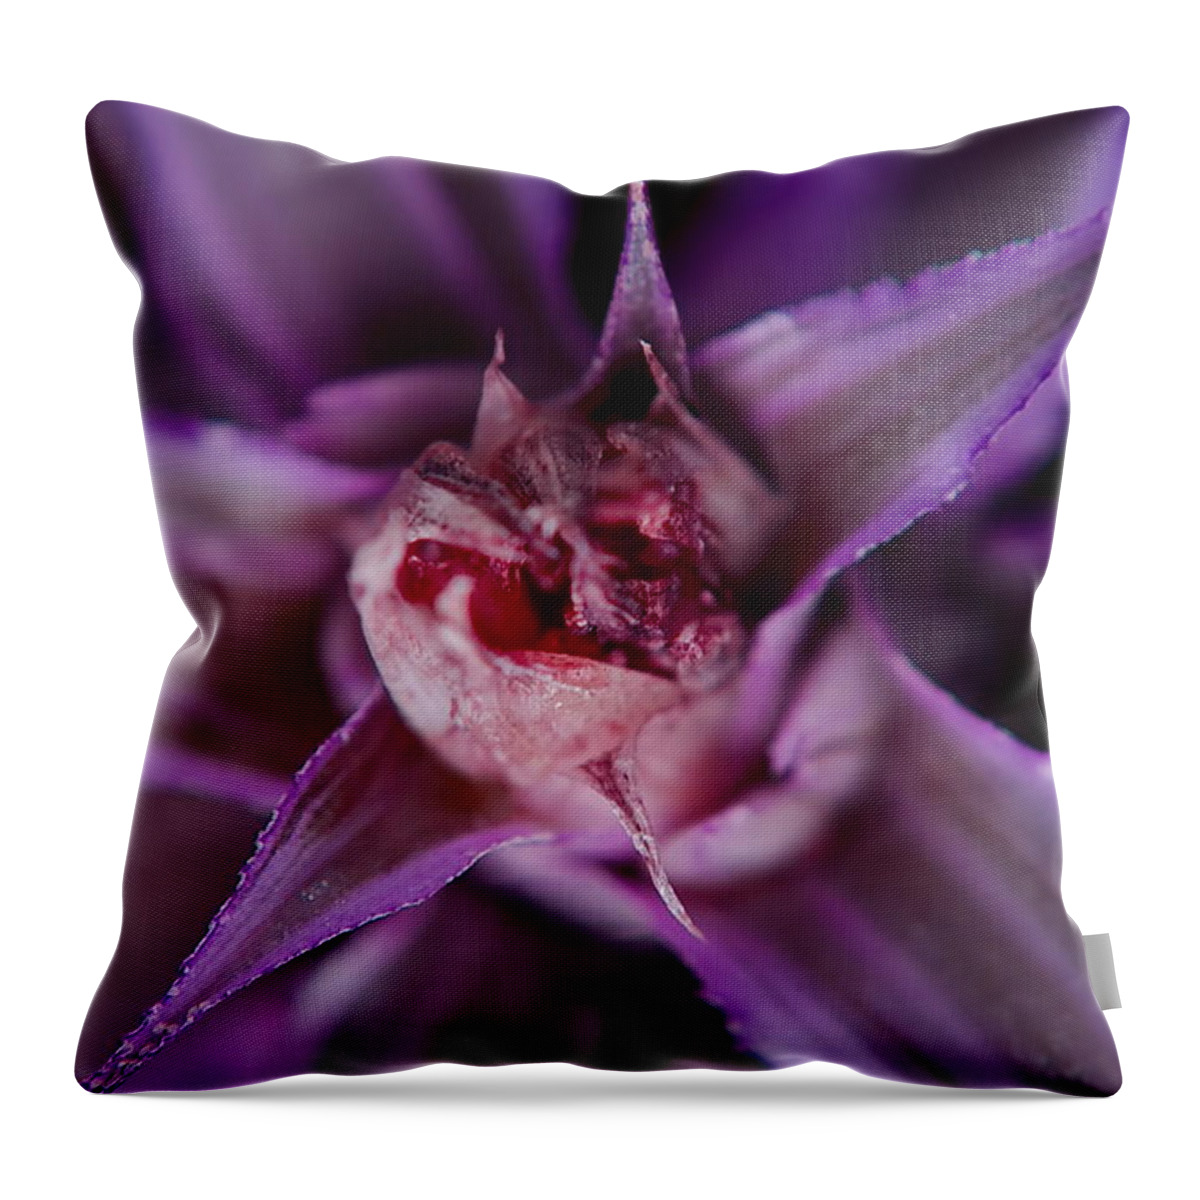 Leaf Throw Pillow featuring the photograph Purple Leaf by Michelle Meenawong